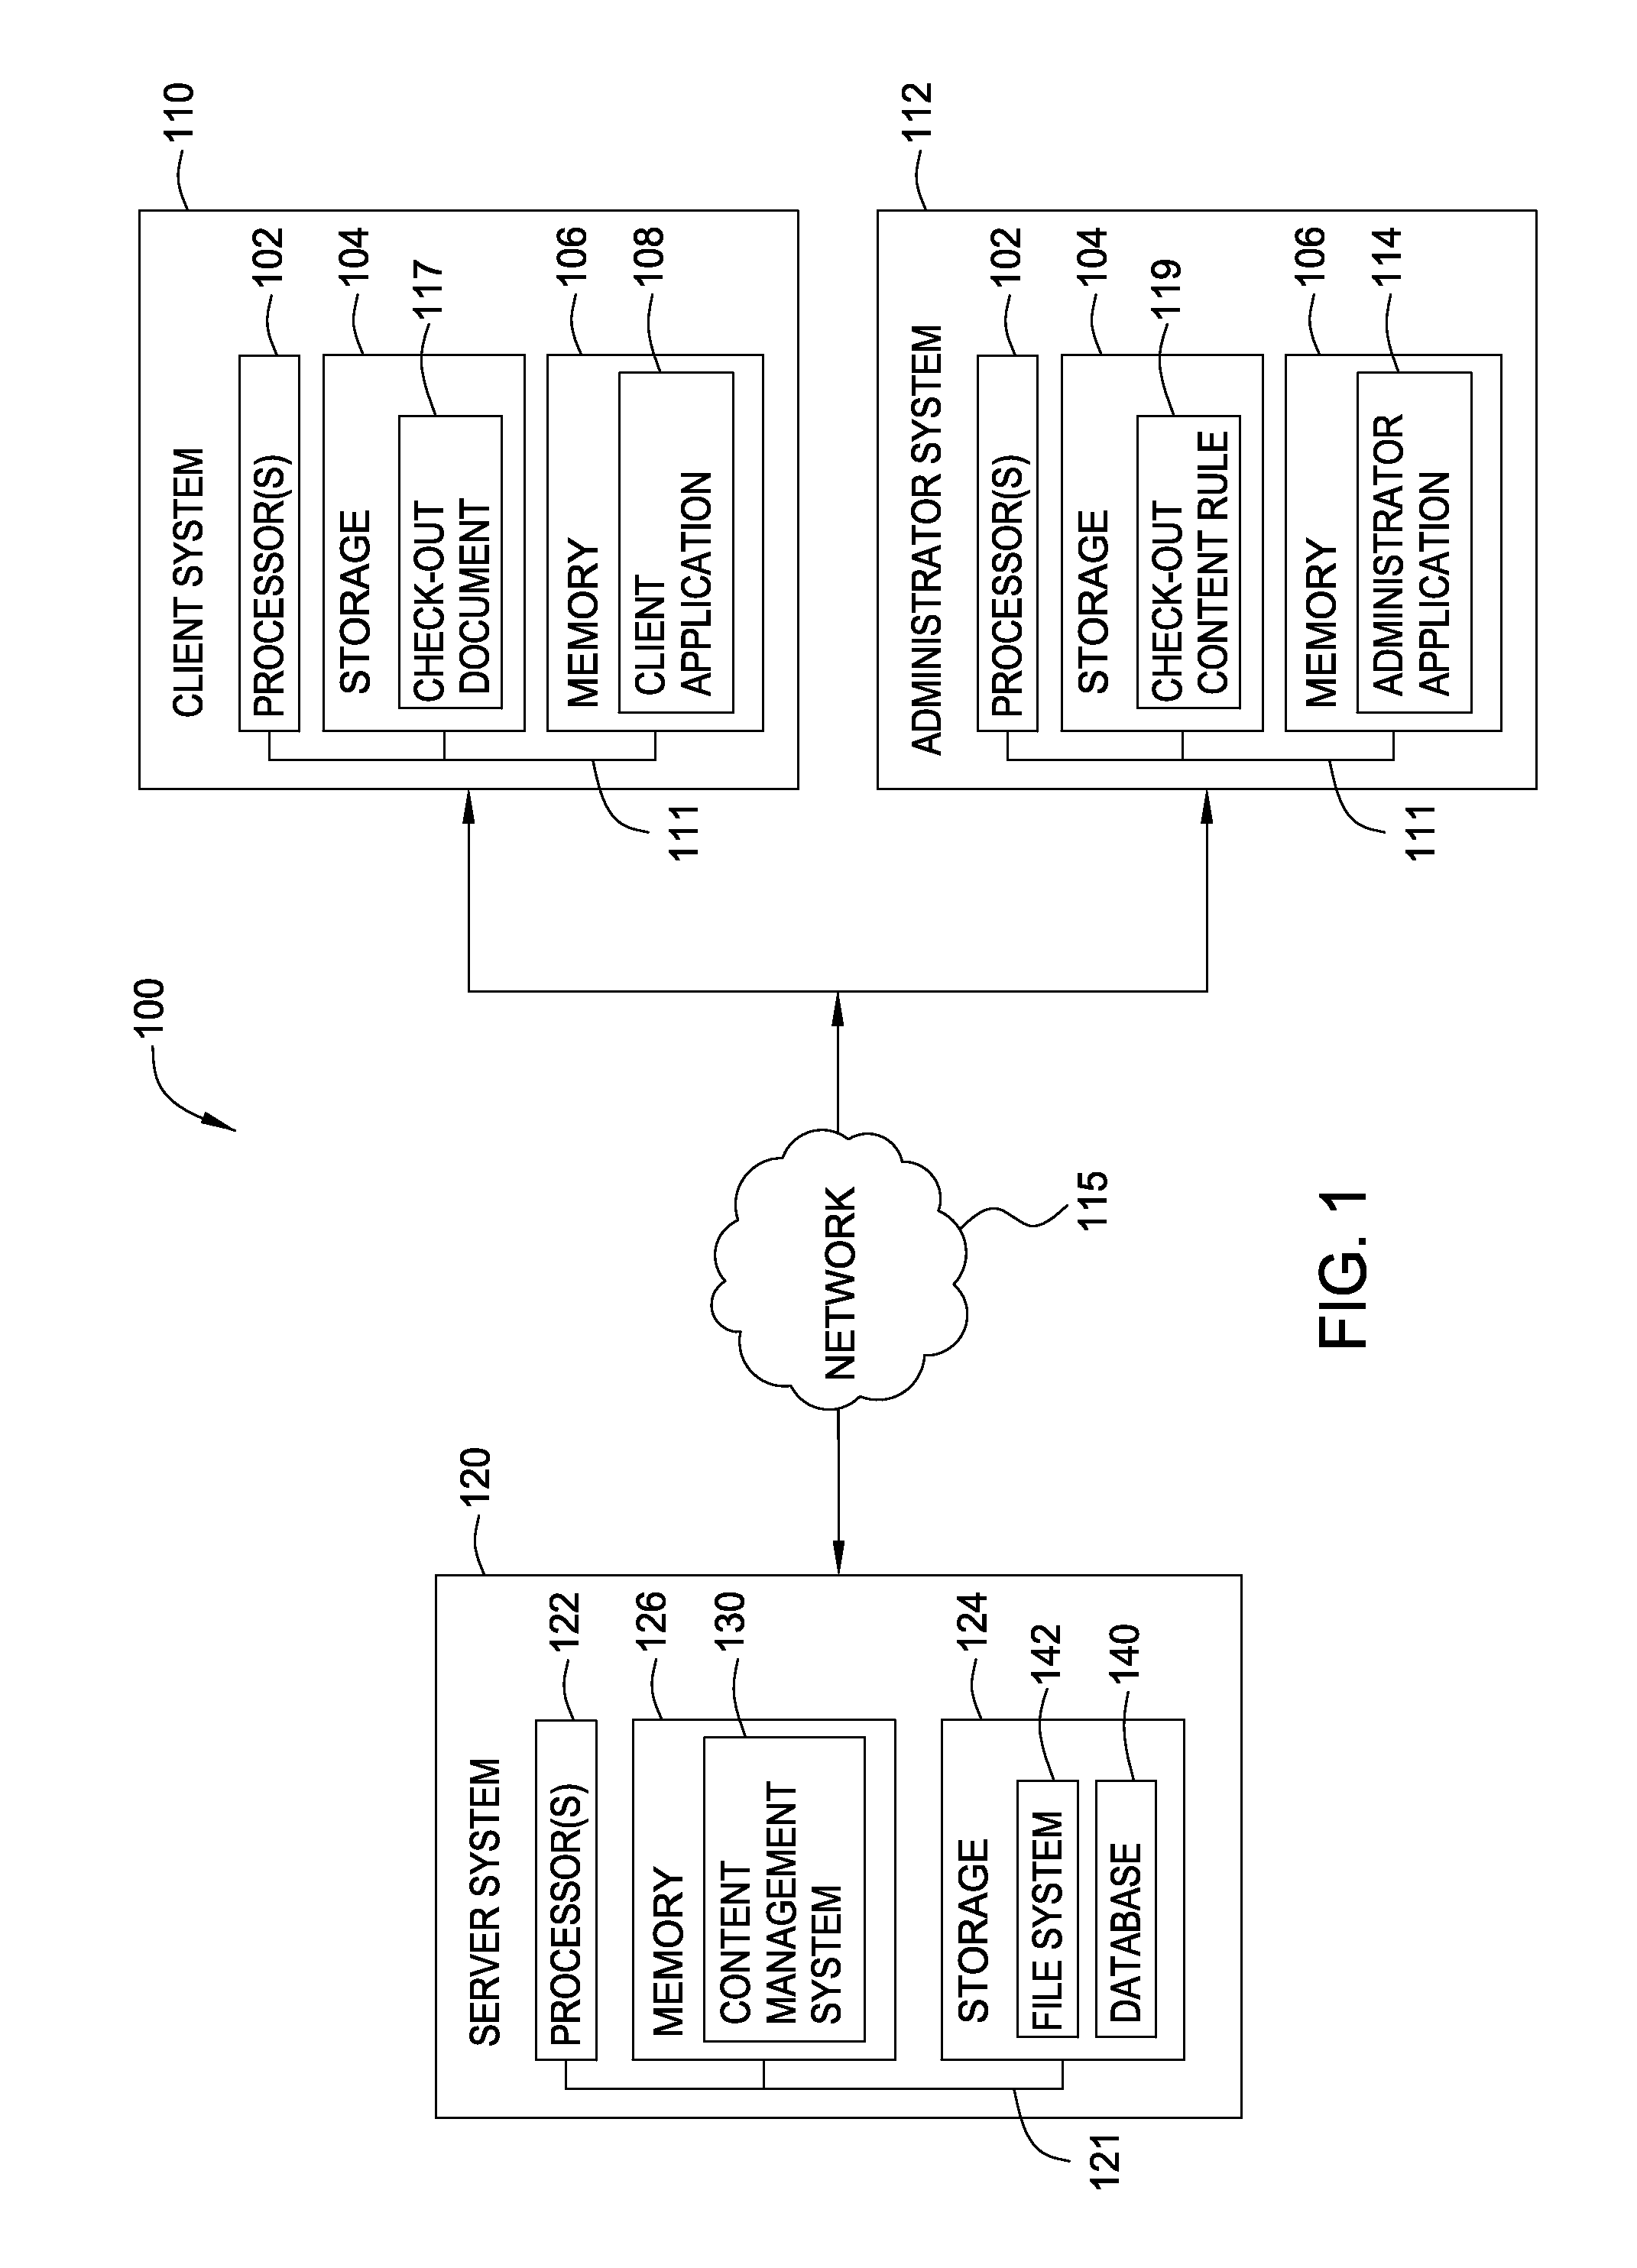 Automated method for detecting and repairing configuration conflicts in a content management system